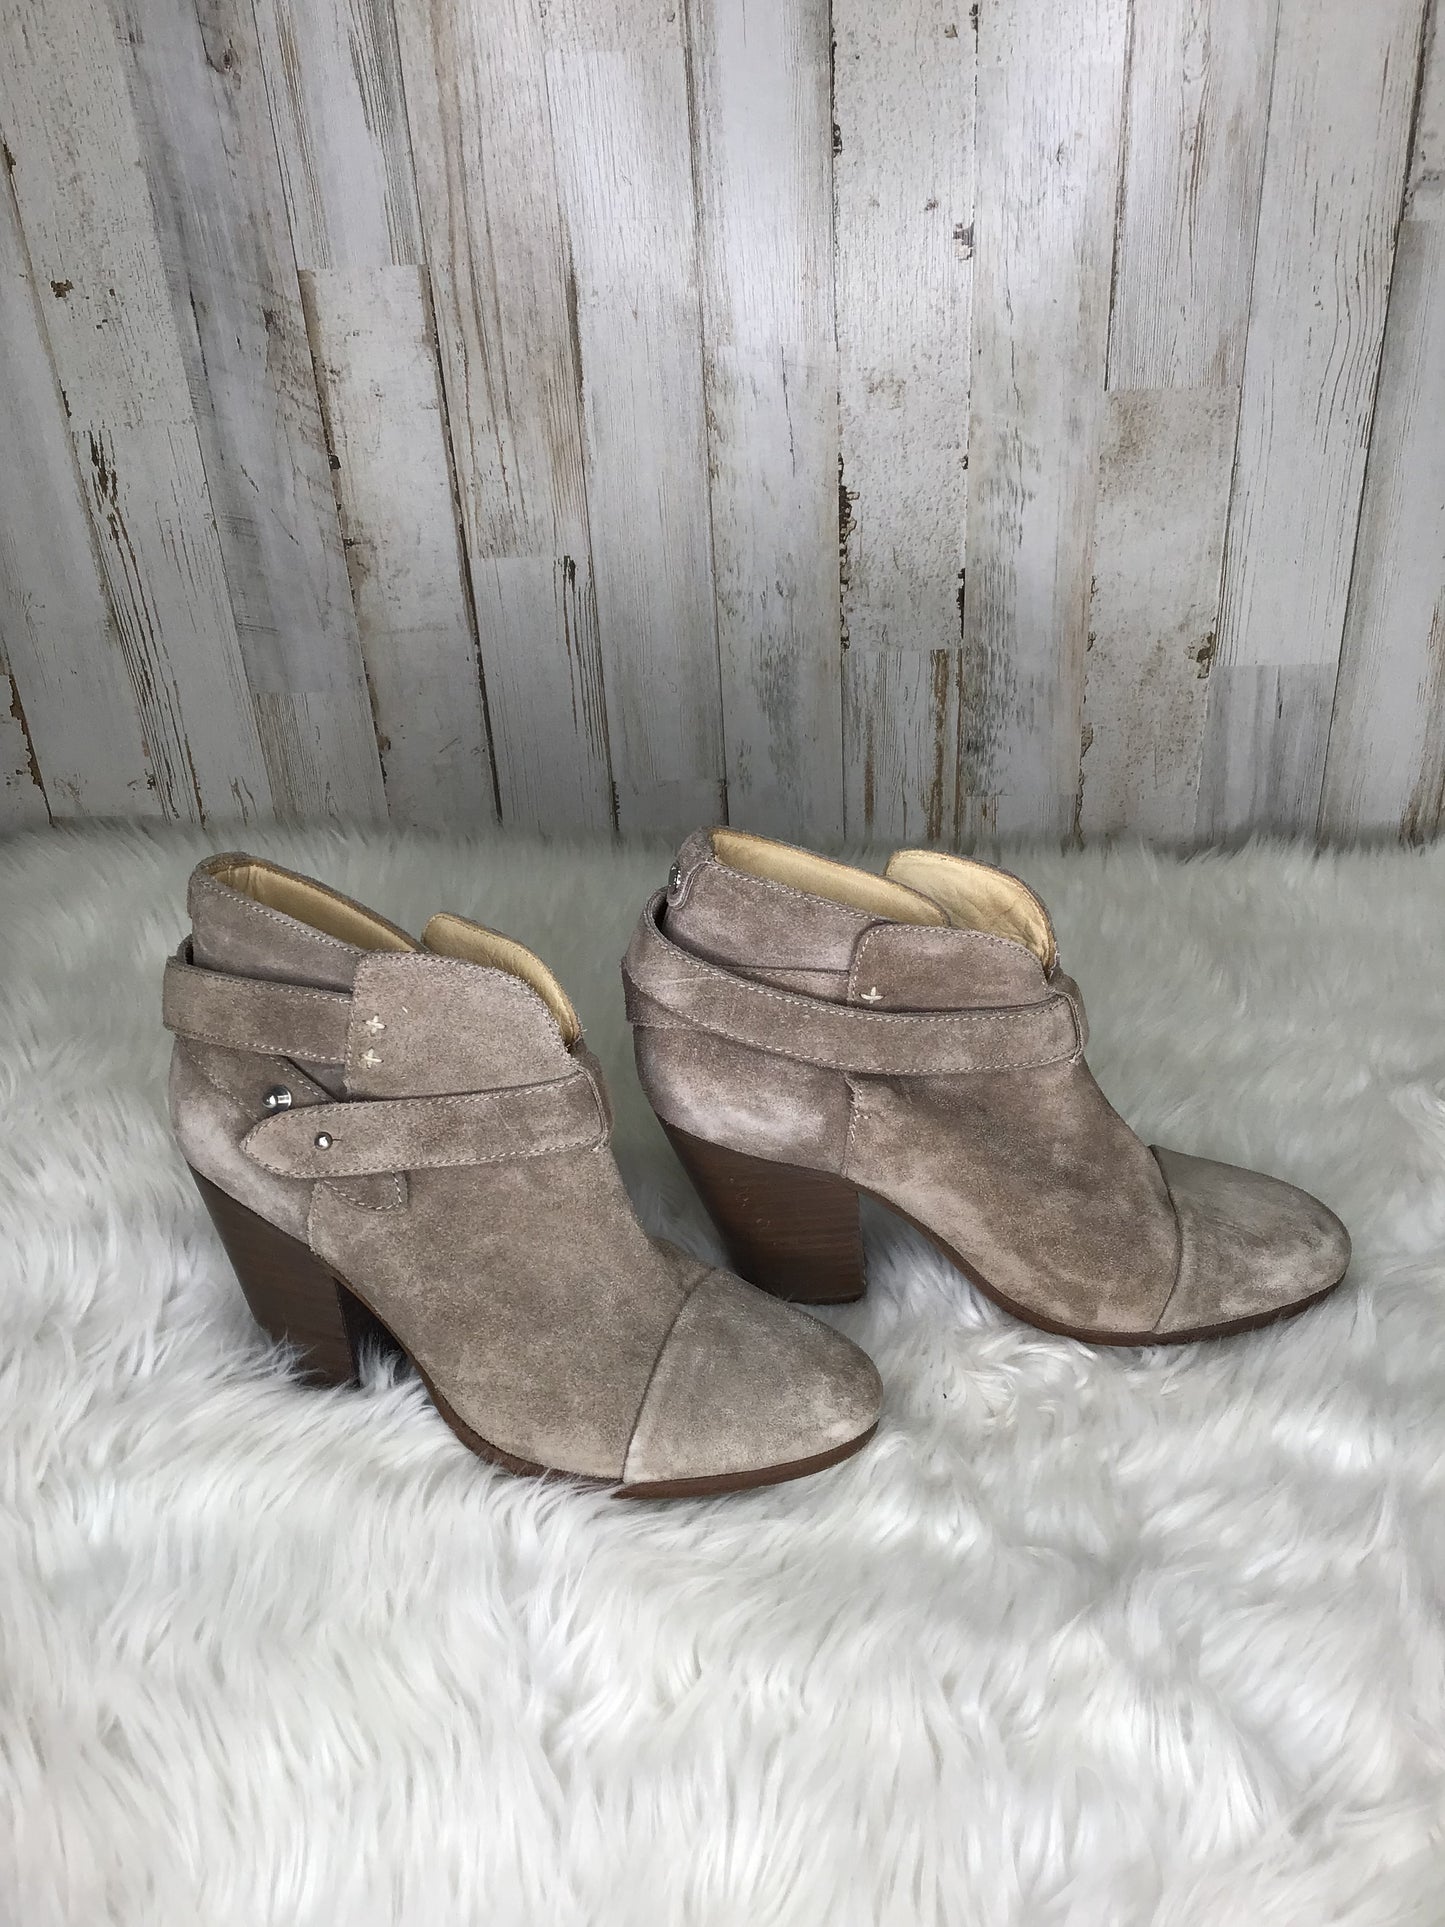 Boots Ankle Heels By Rag And Bone  Size: 6.5